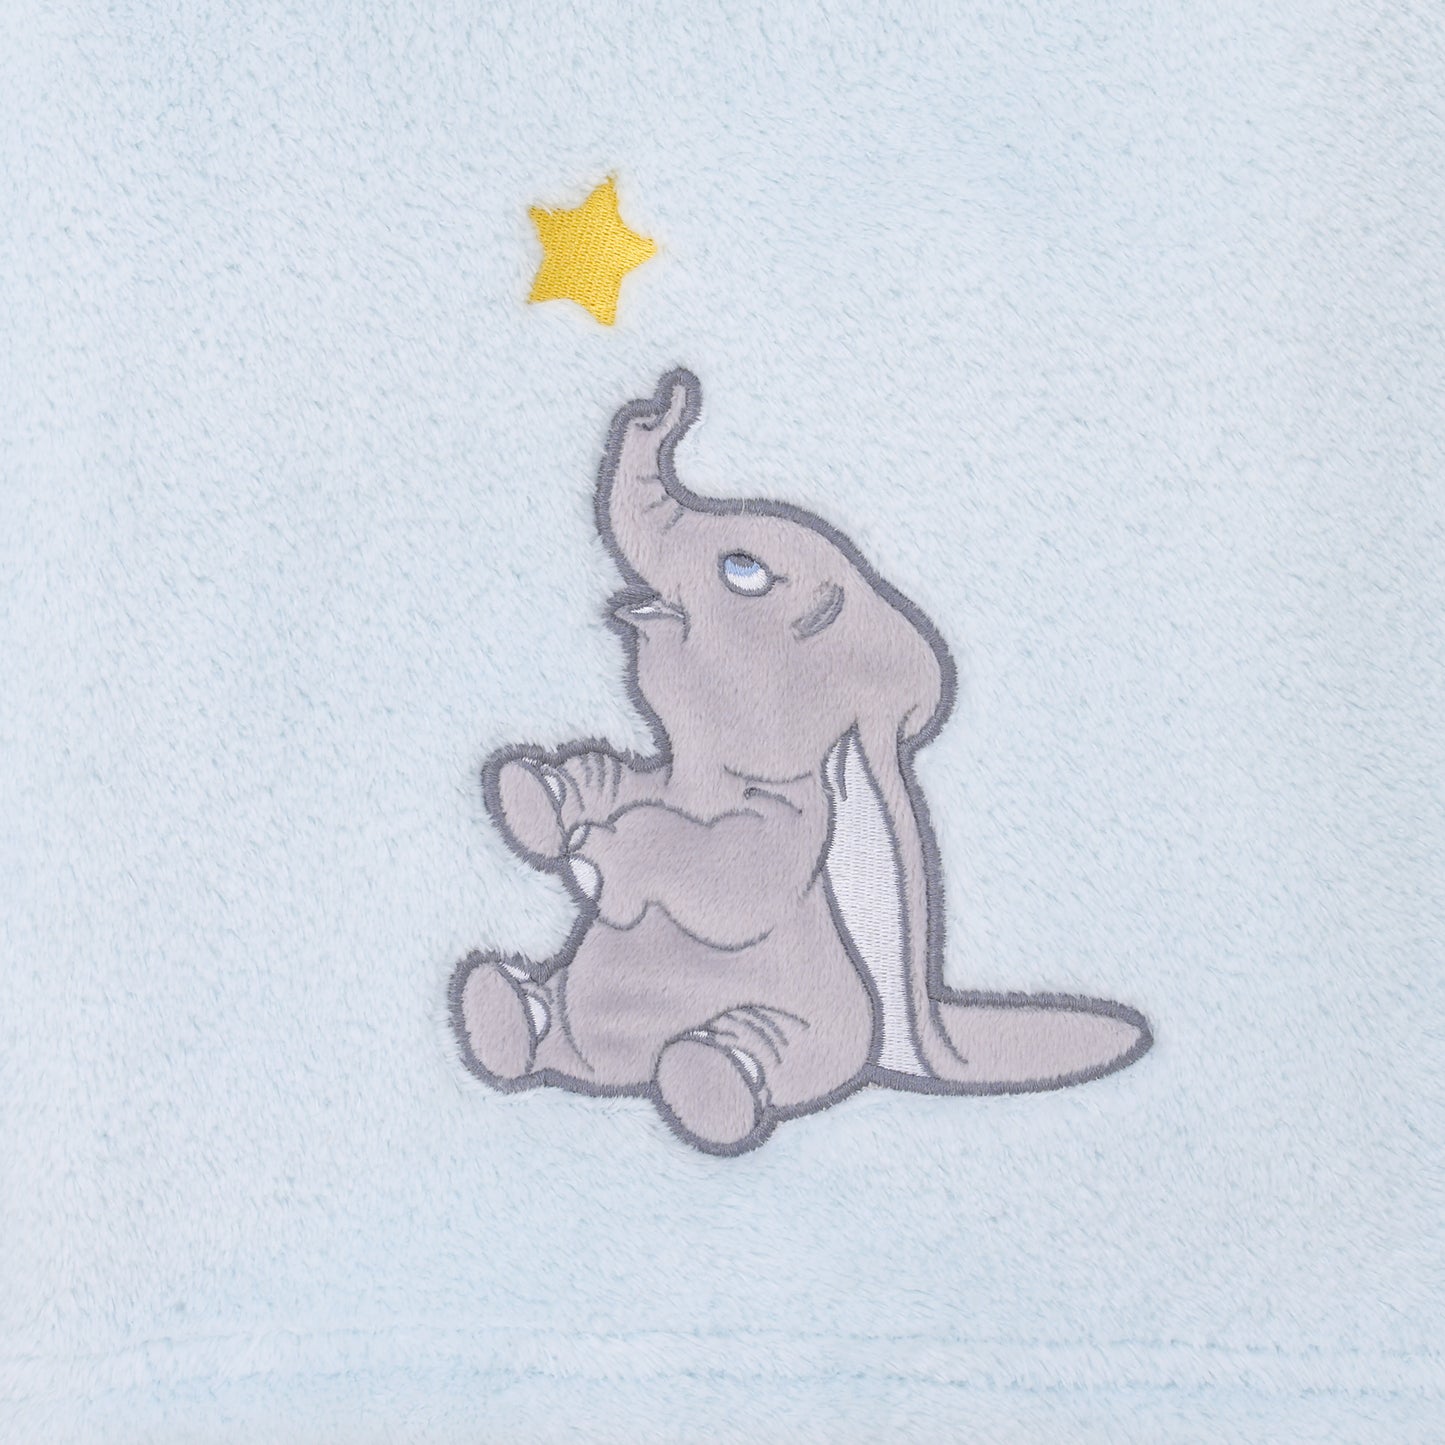 Disney Dumbo - Shine Bright Little Star Aqua, Grey and Yellow Super Soft Baby Blanket with Applique